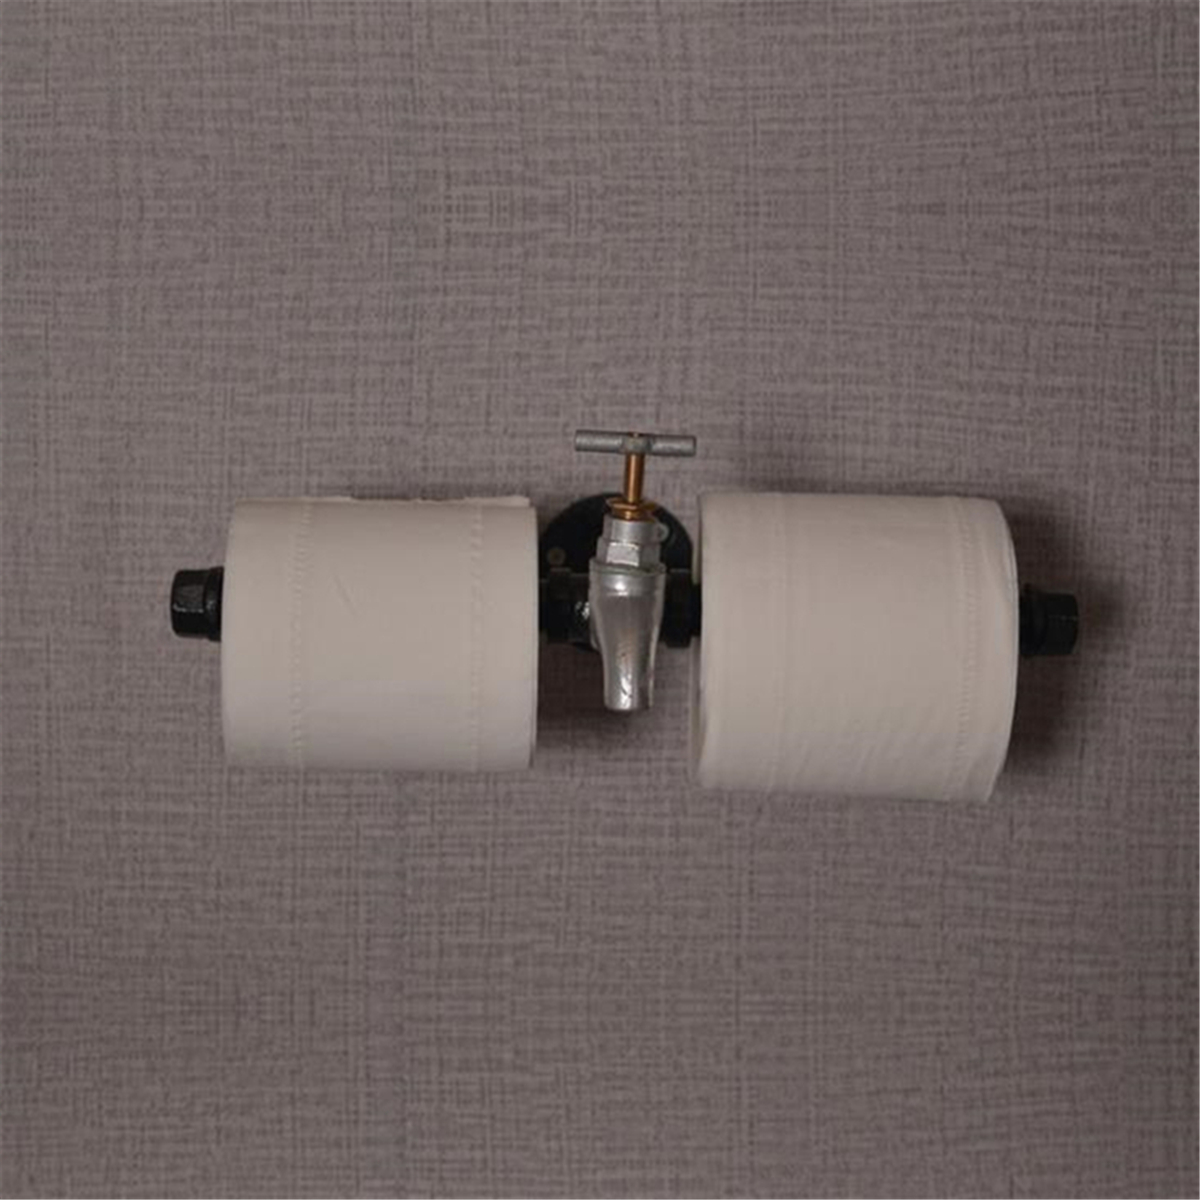 Retro-Industrial-Toilet-Paper-Roll-Holder-Pipe-Shelf-Floating-Holder-Bathroom-Wall-Mounted-1390098-4